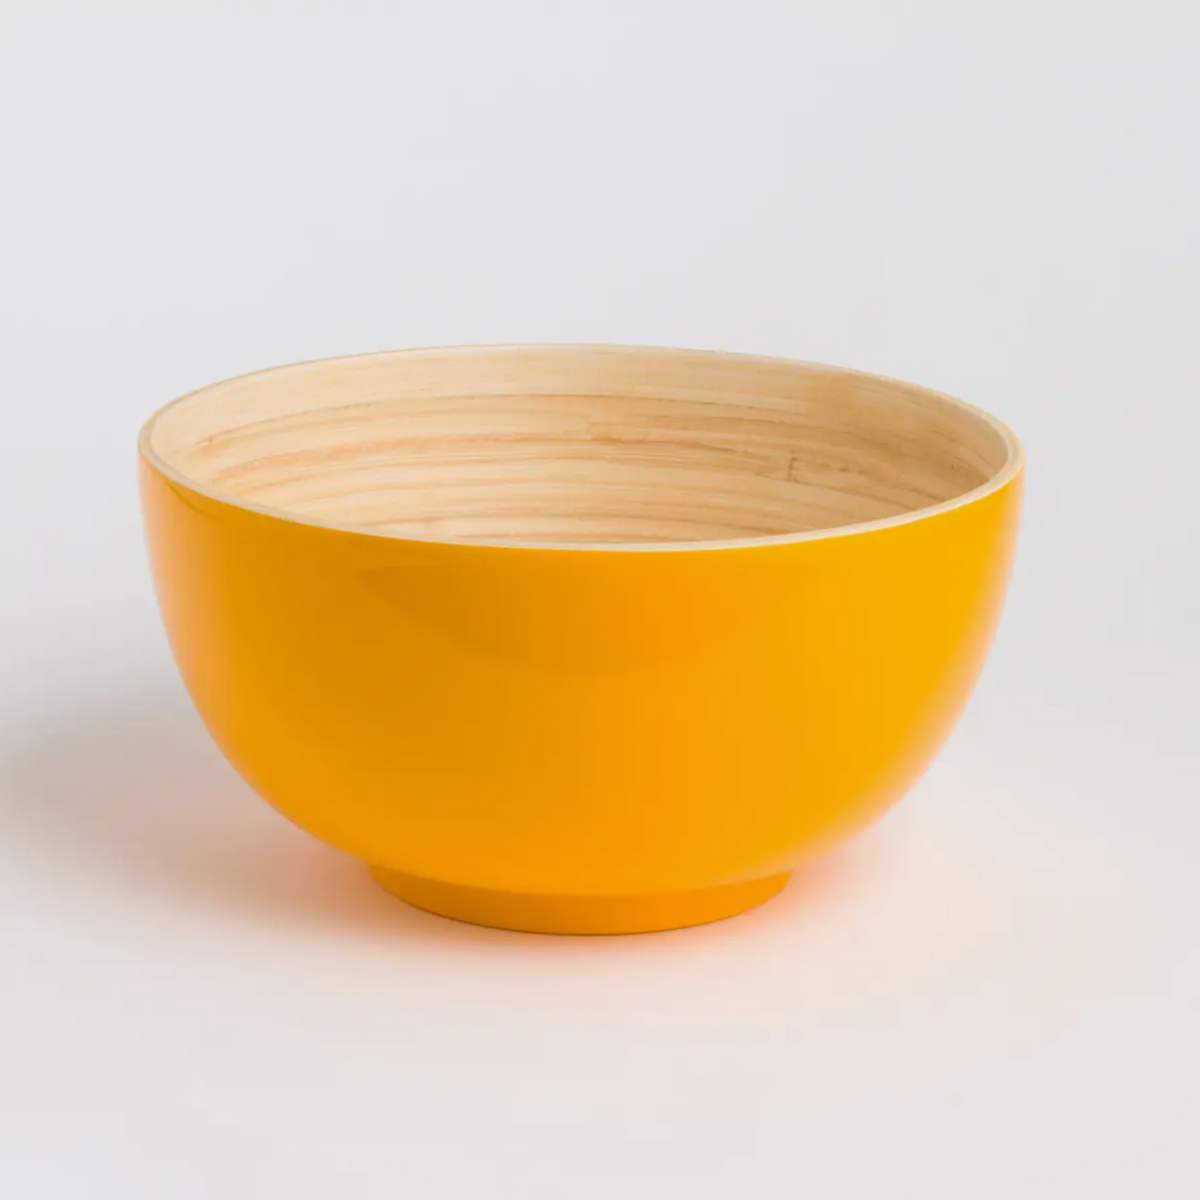 Bamboo Serving Bowl in Lacquer, Large